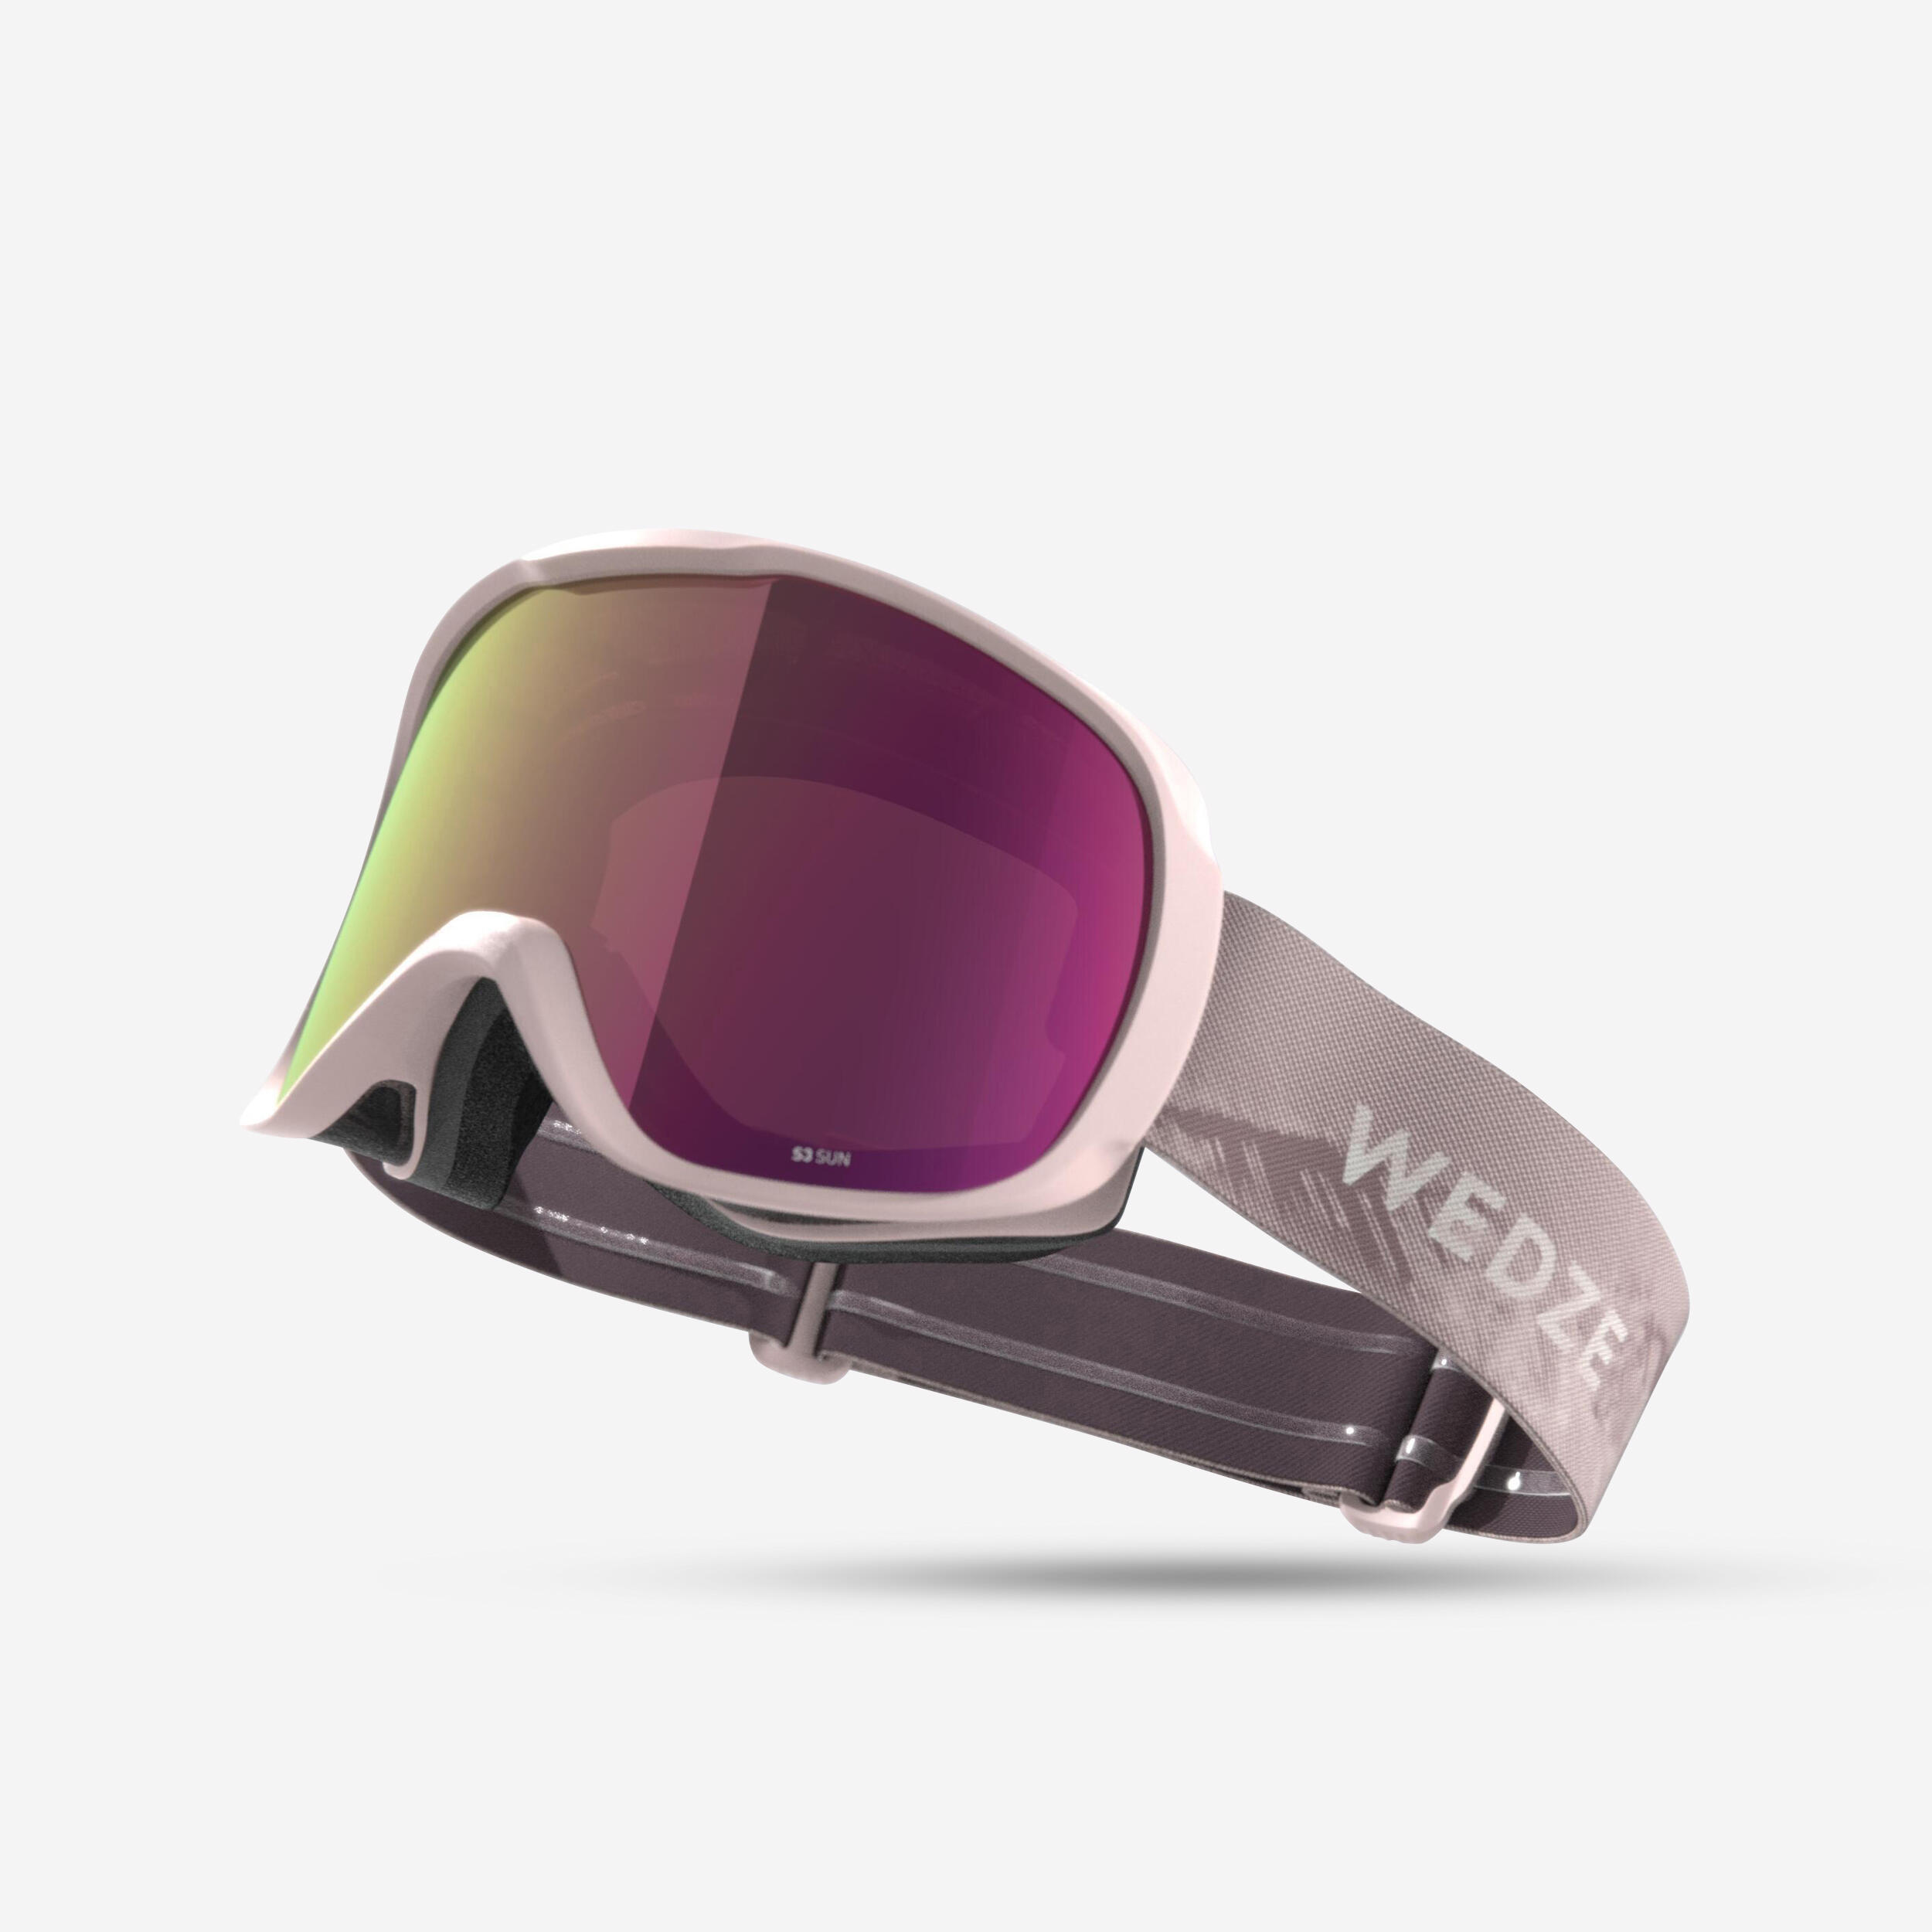 KIDS AND ADULT SKIING AND SNOWBOARDING GOGGLES GOOD WEATHER - G 500 S3 - PINK 1/7